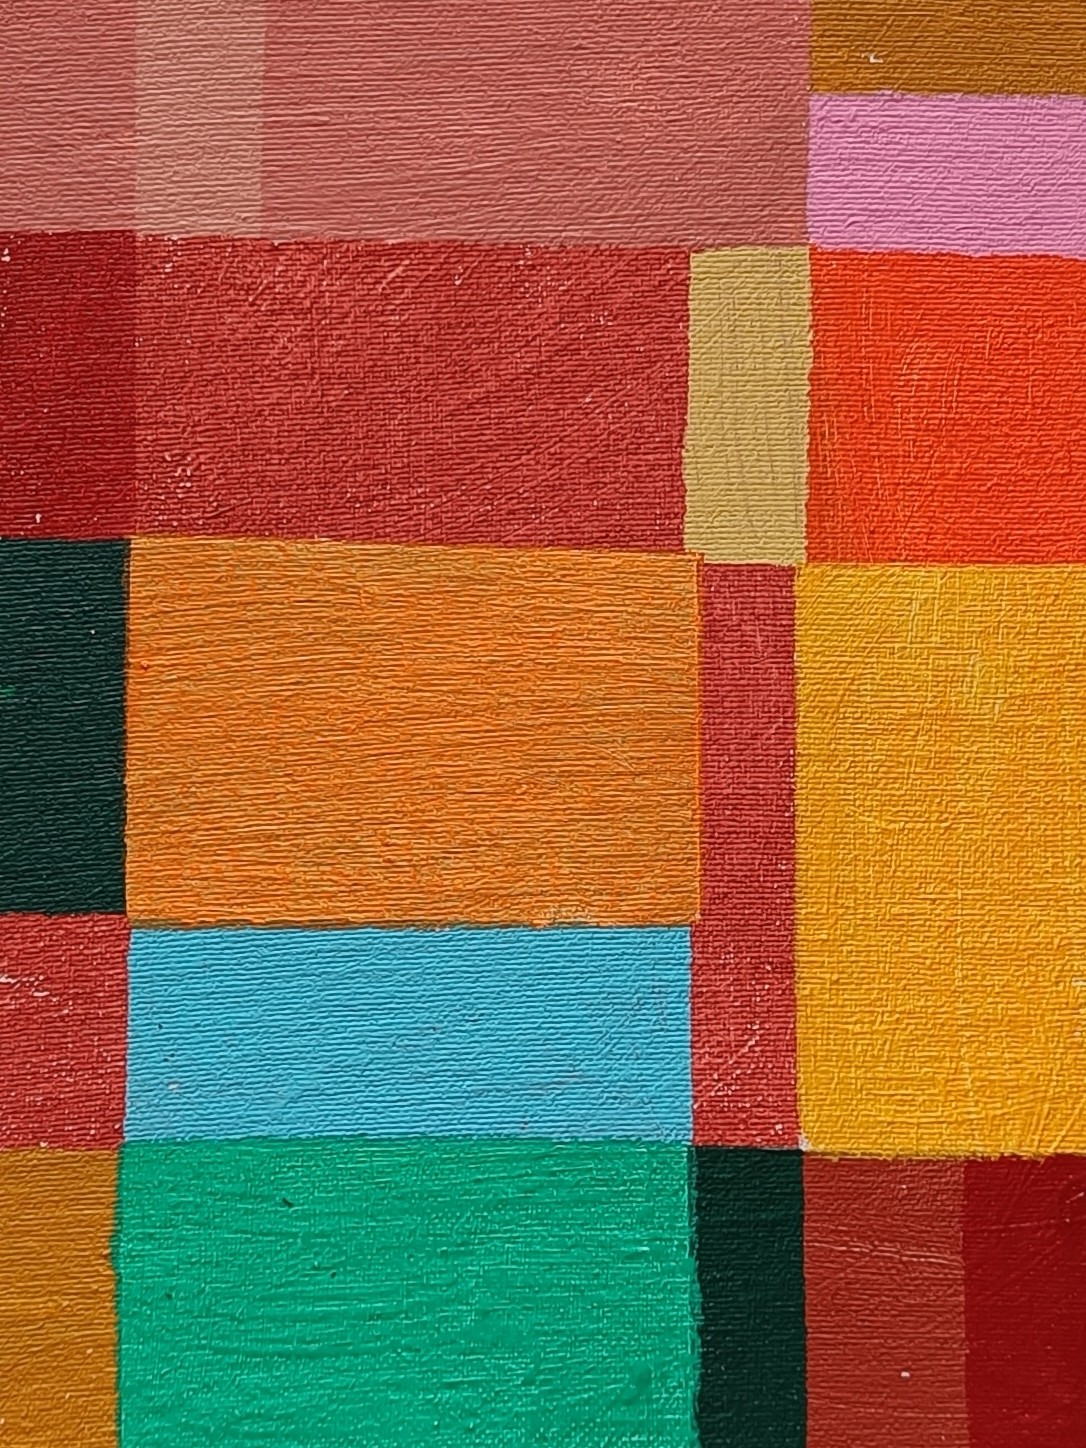 Color geometric,20x20cm, painting on paper, close-up